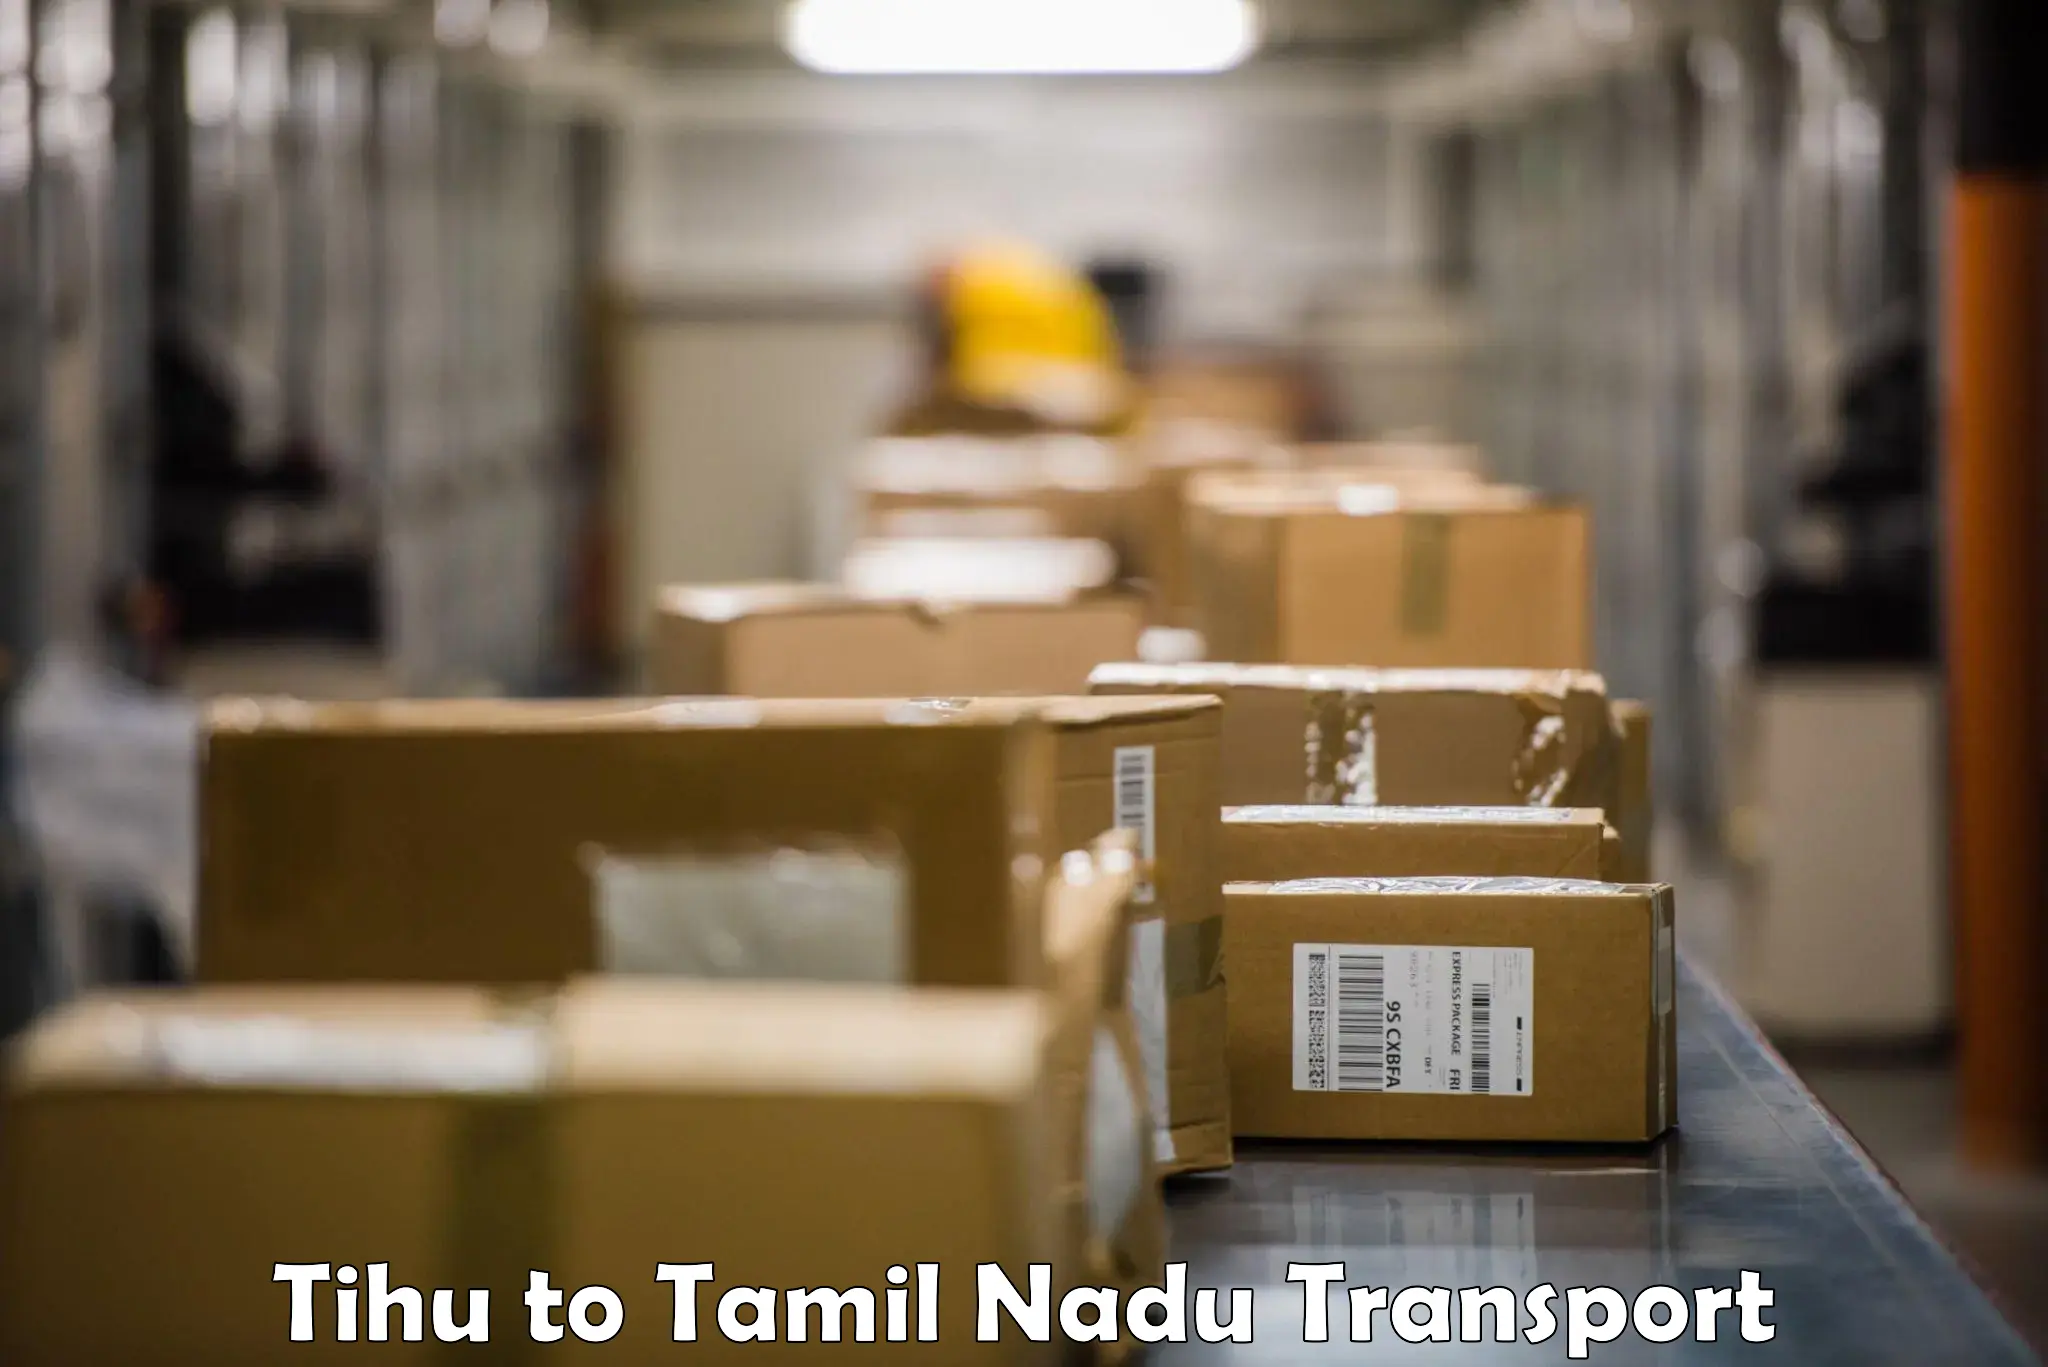 Cargo transport services Tihu to Ennore Port Chennai